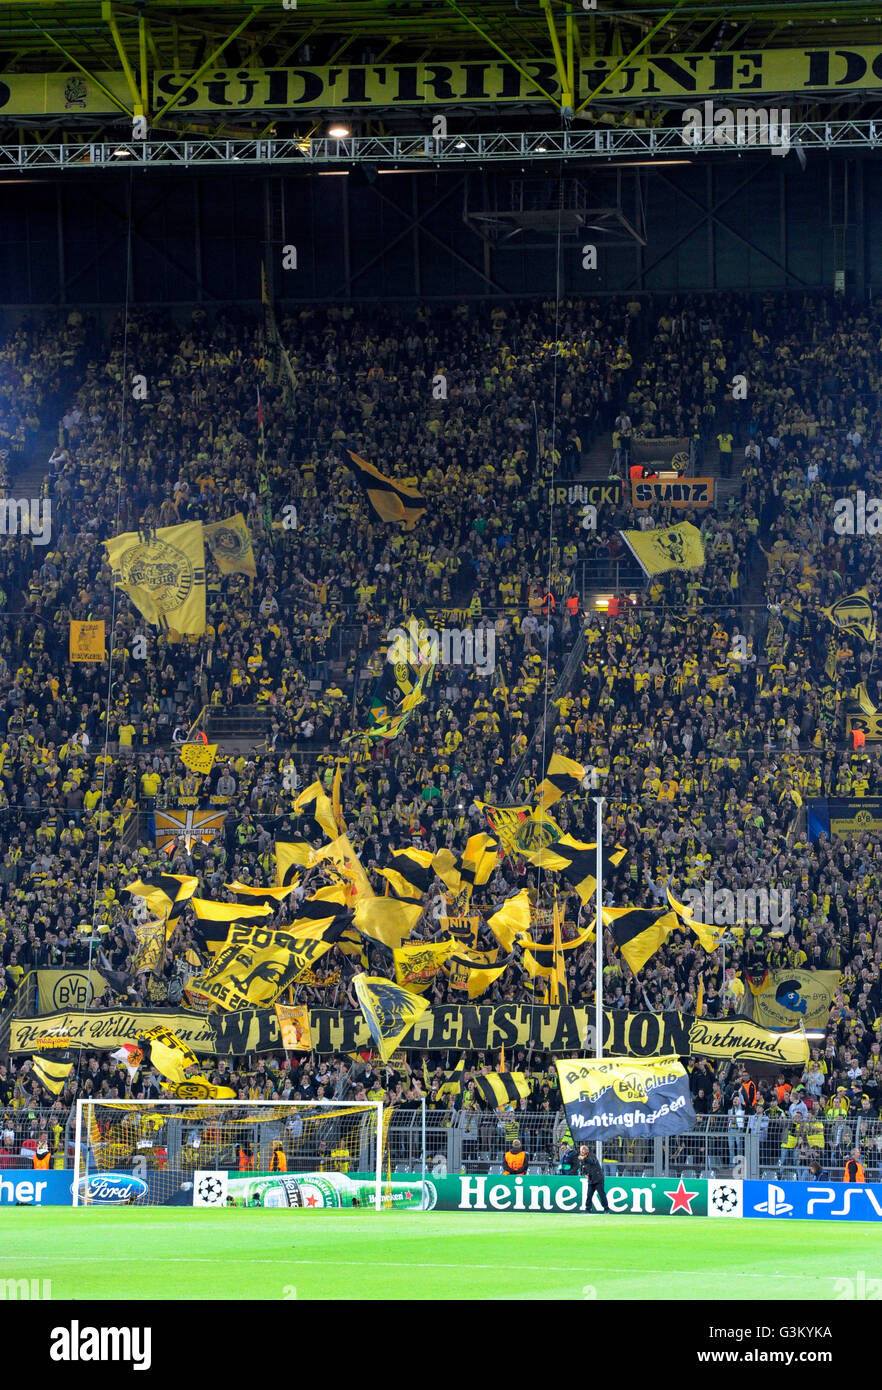 BVB fans in the south stand waving their flags before the start of the  game, UEFA Champions League, Borussia Dortmund - Ajax Stock Photo - Alamy